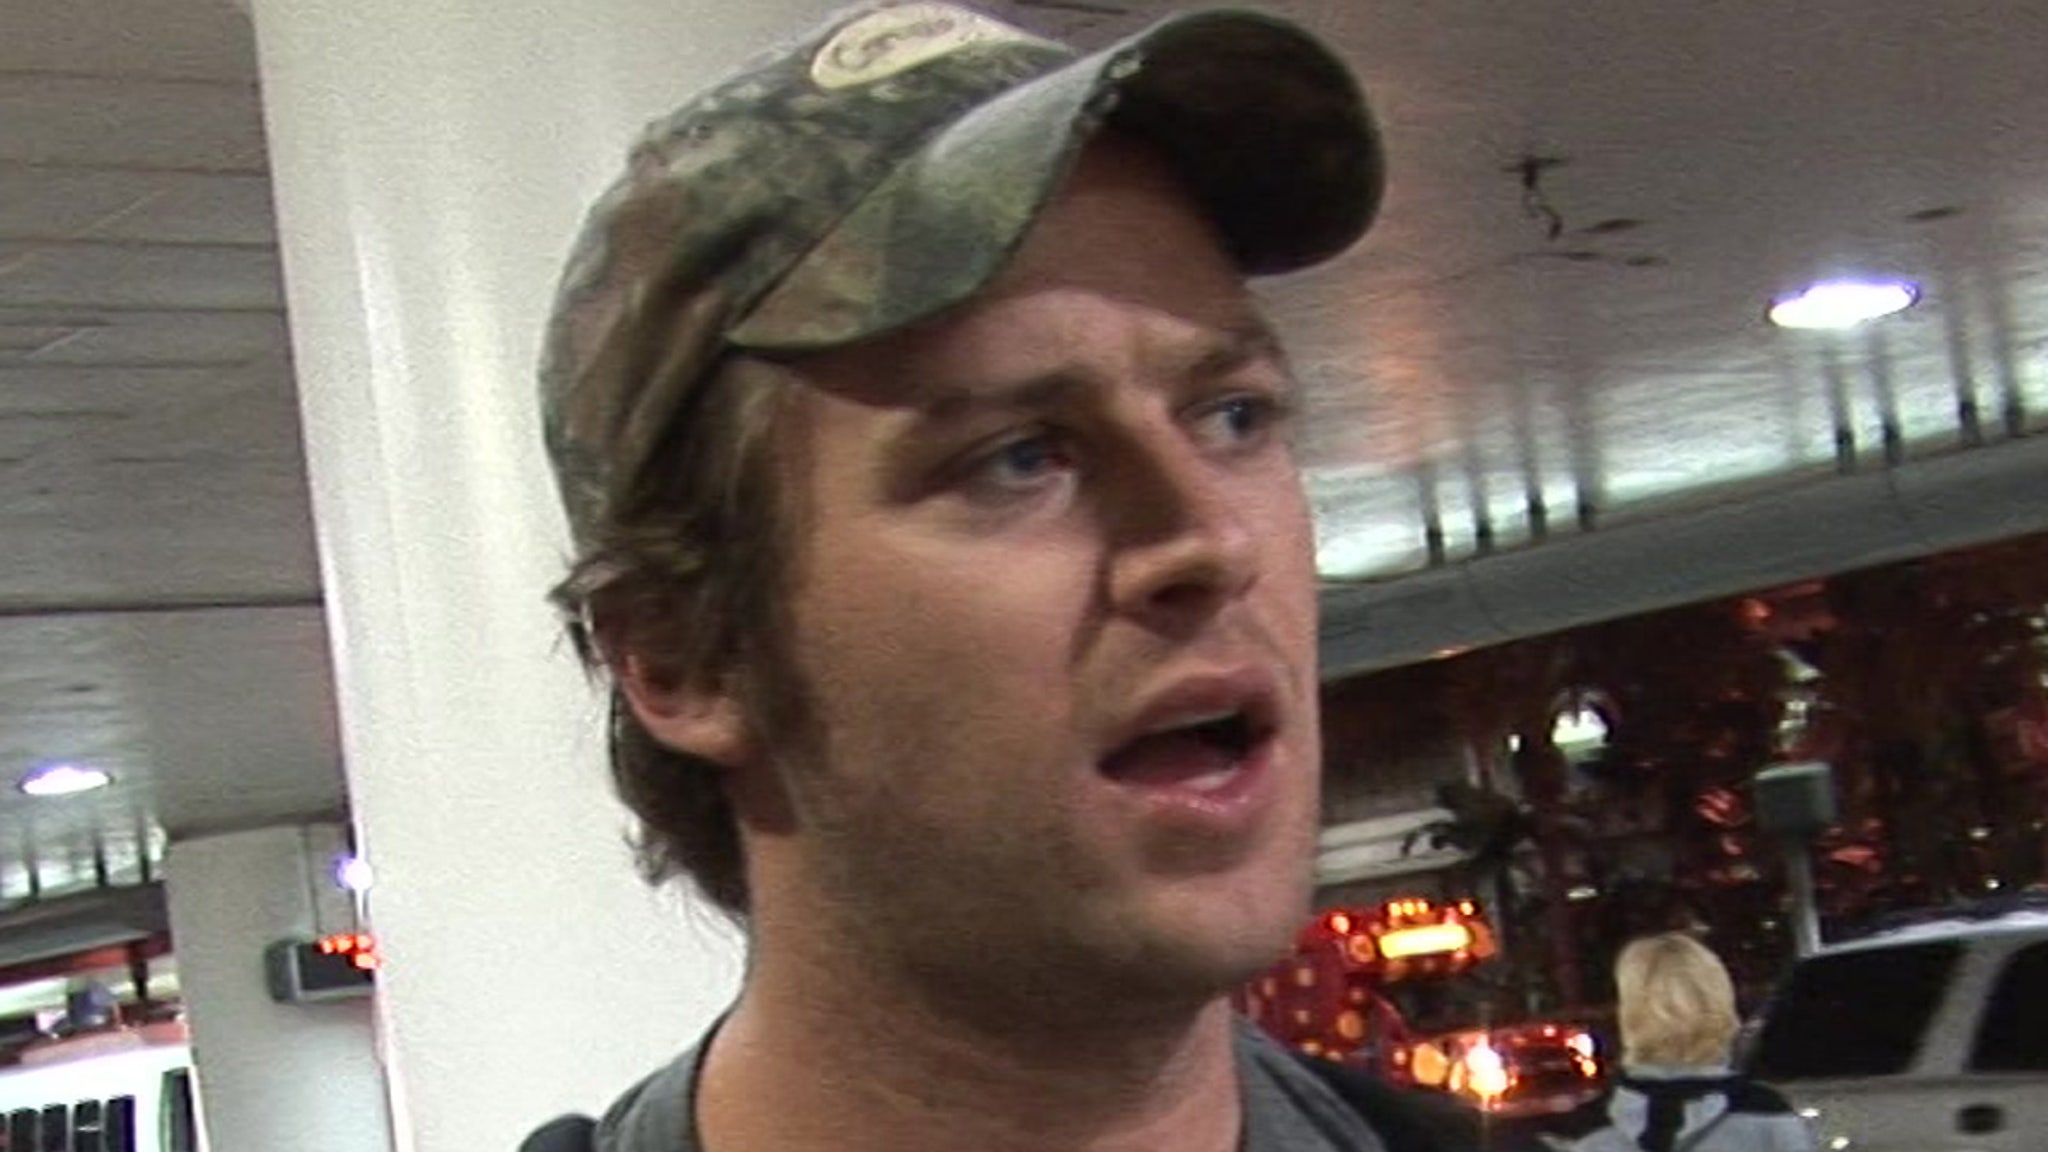 Armie Hammer, accused of rape, he denies it, but the police are investigating